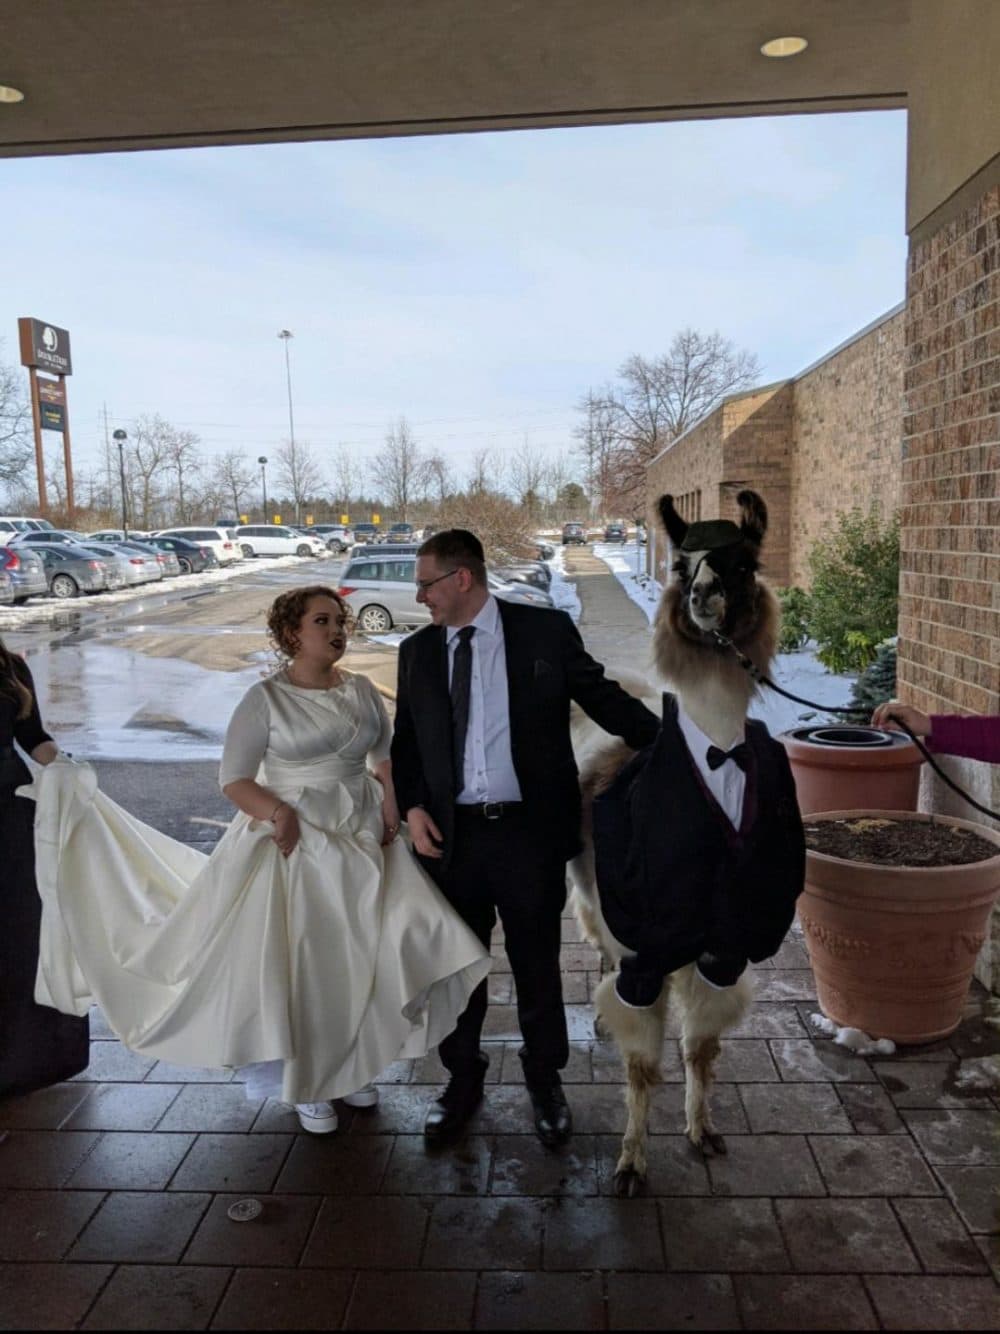 Mendl Weinstock (middle) and the llama he brought to his sister's (left) wedding (courtesy Mendl Weinstock)